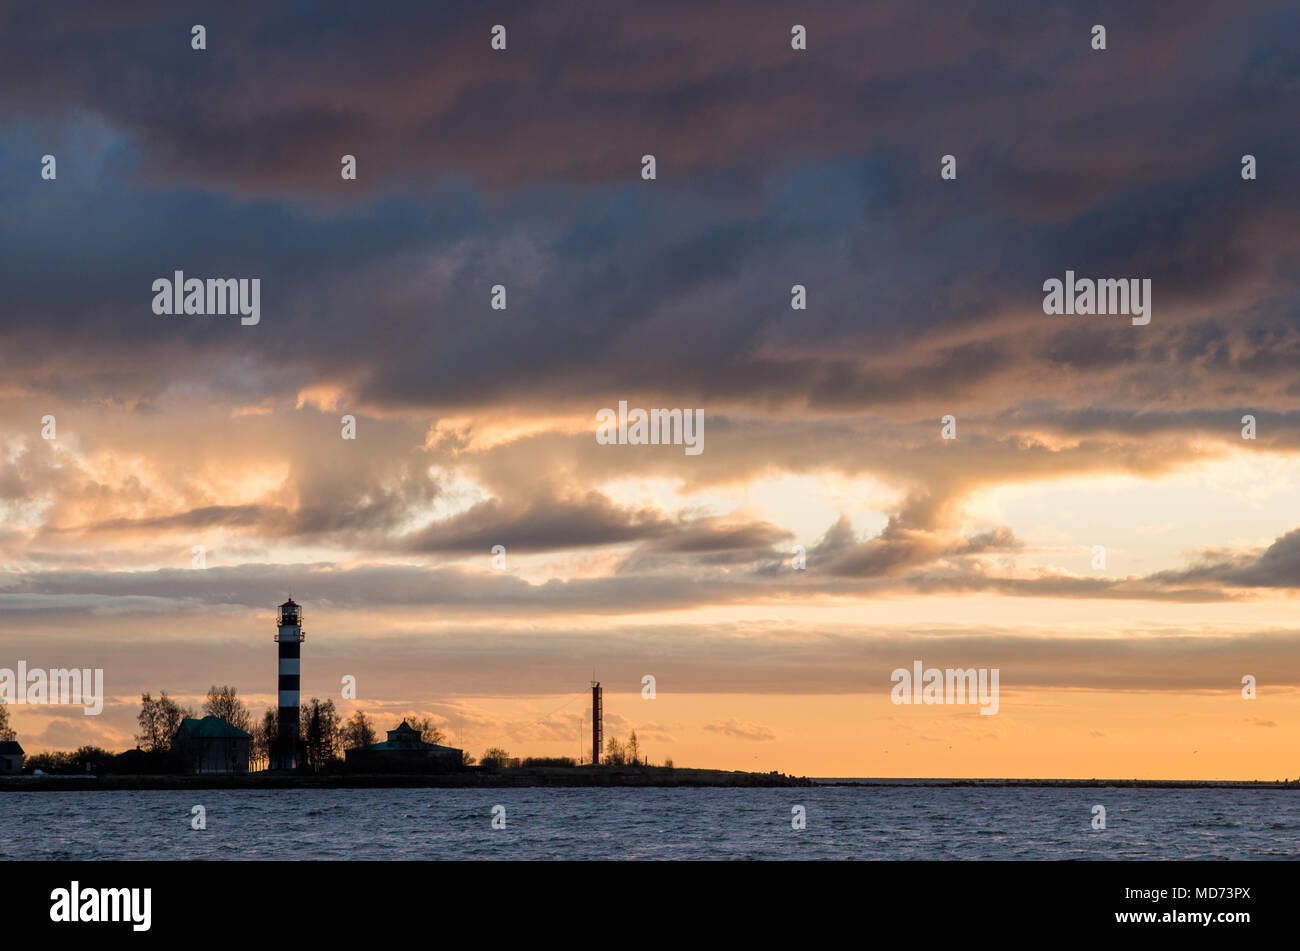 Beautiful clouds in warm light of a setting sun over a lighthouse on a seaside. Stock Photo